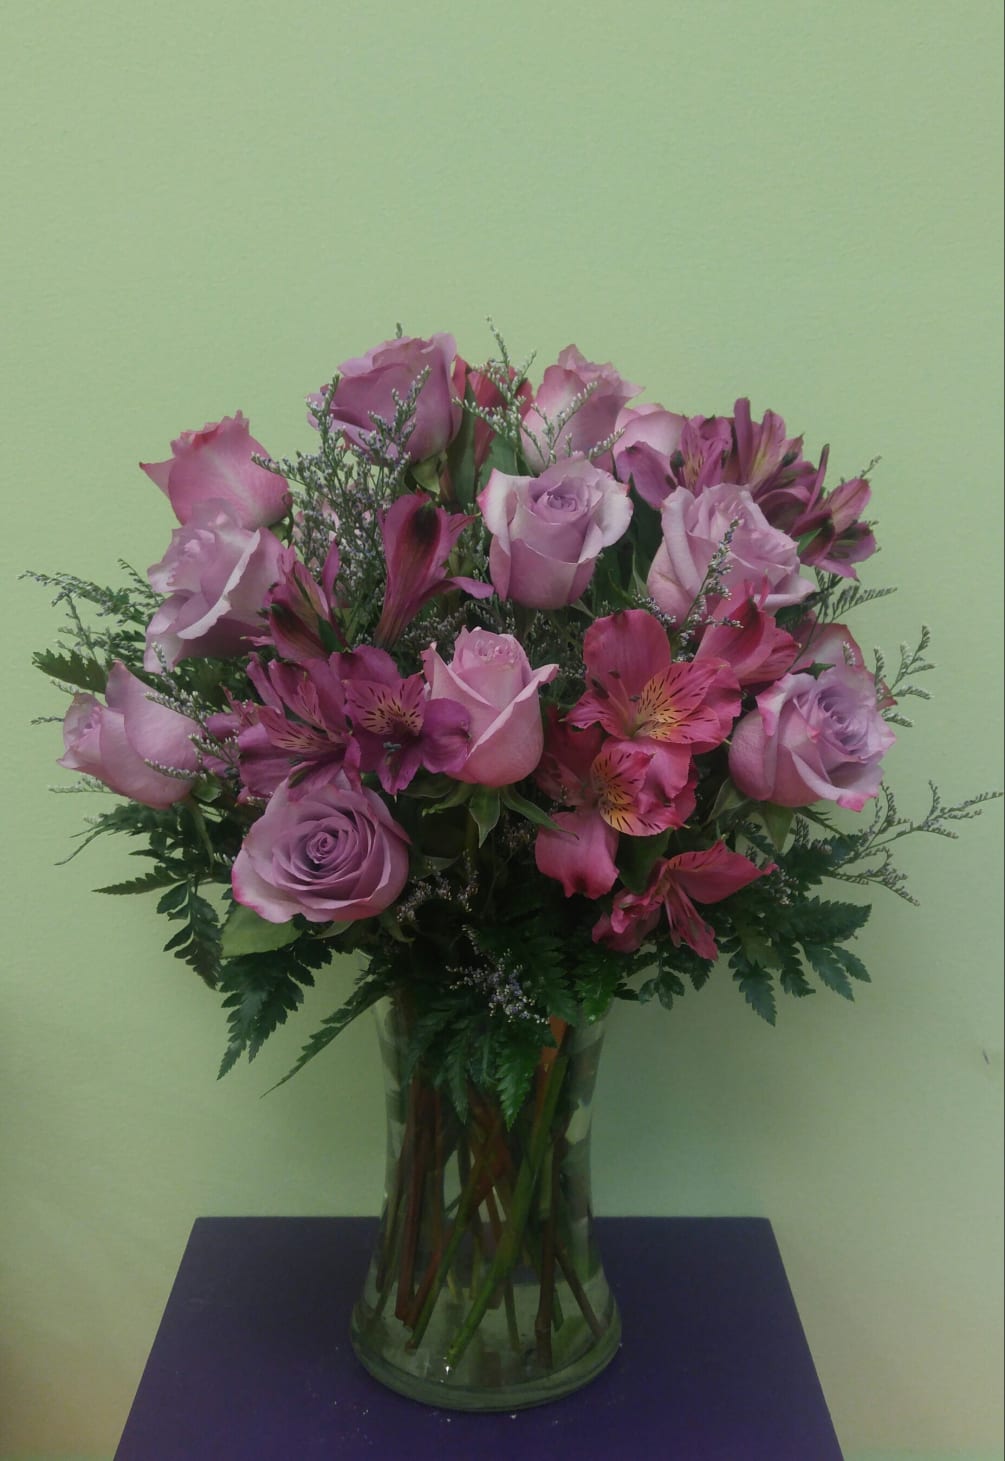 This beautiful purple and lavender arrangement is truly exquisite. It includes lavender